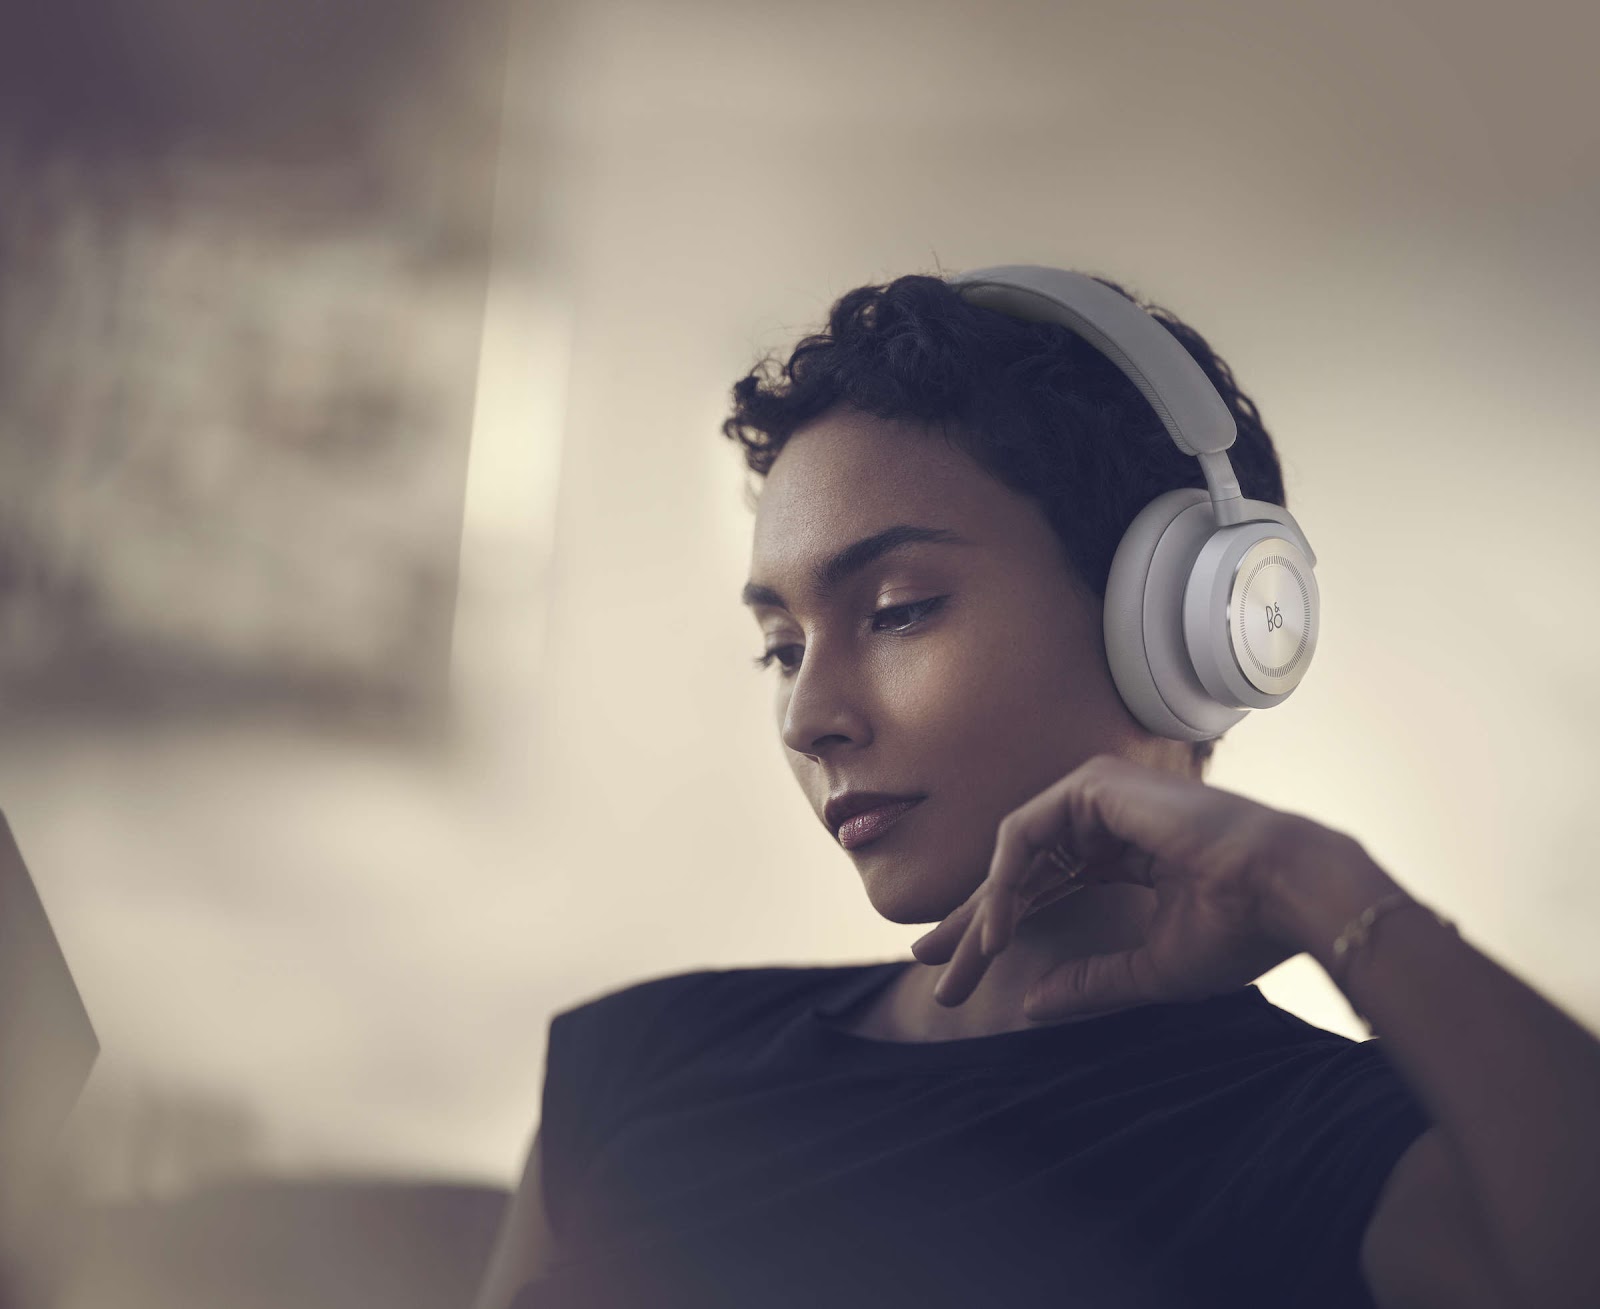 Bang & Olufsen presents the Beoplay HX and Beoplay Portal headphones